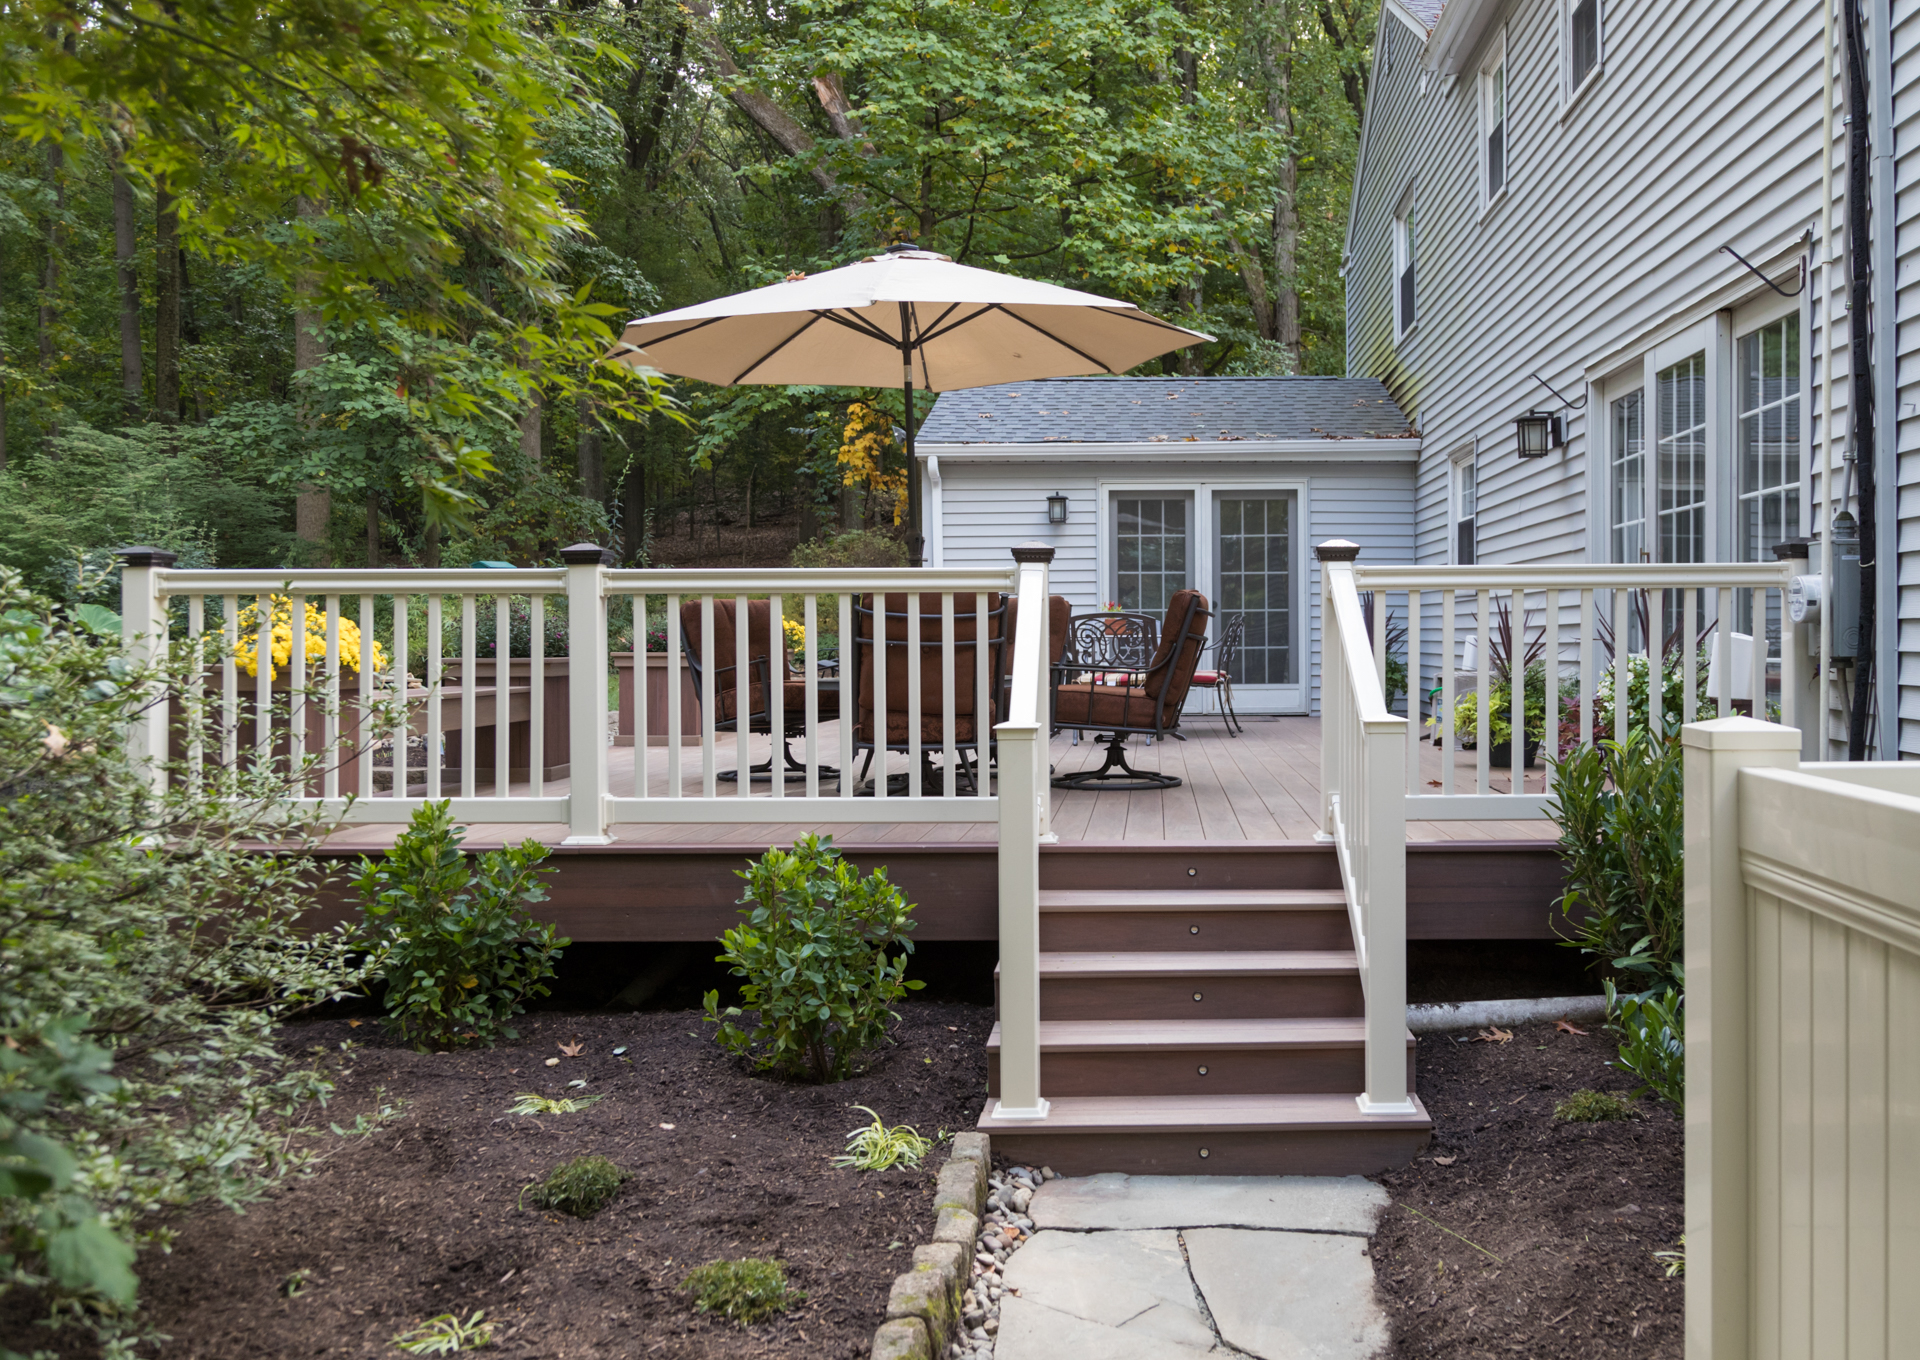 Deck color ideas – how to choose the color to stain or paint your deck